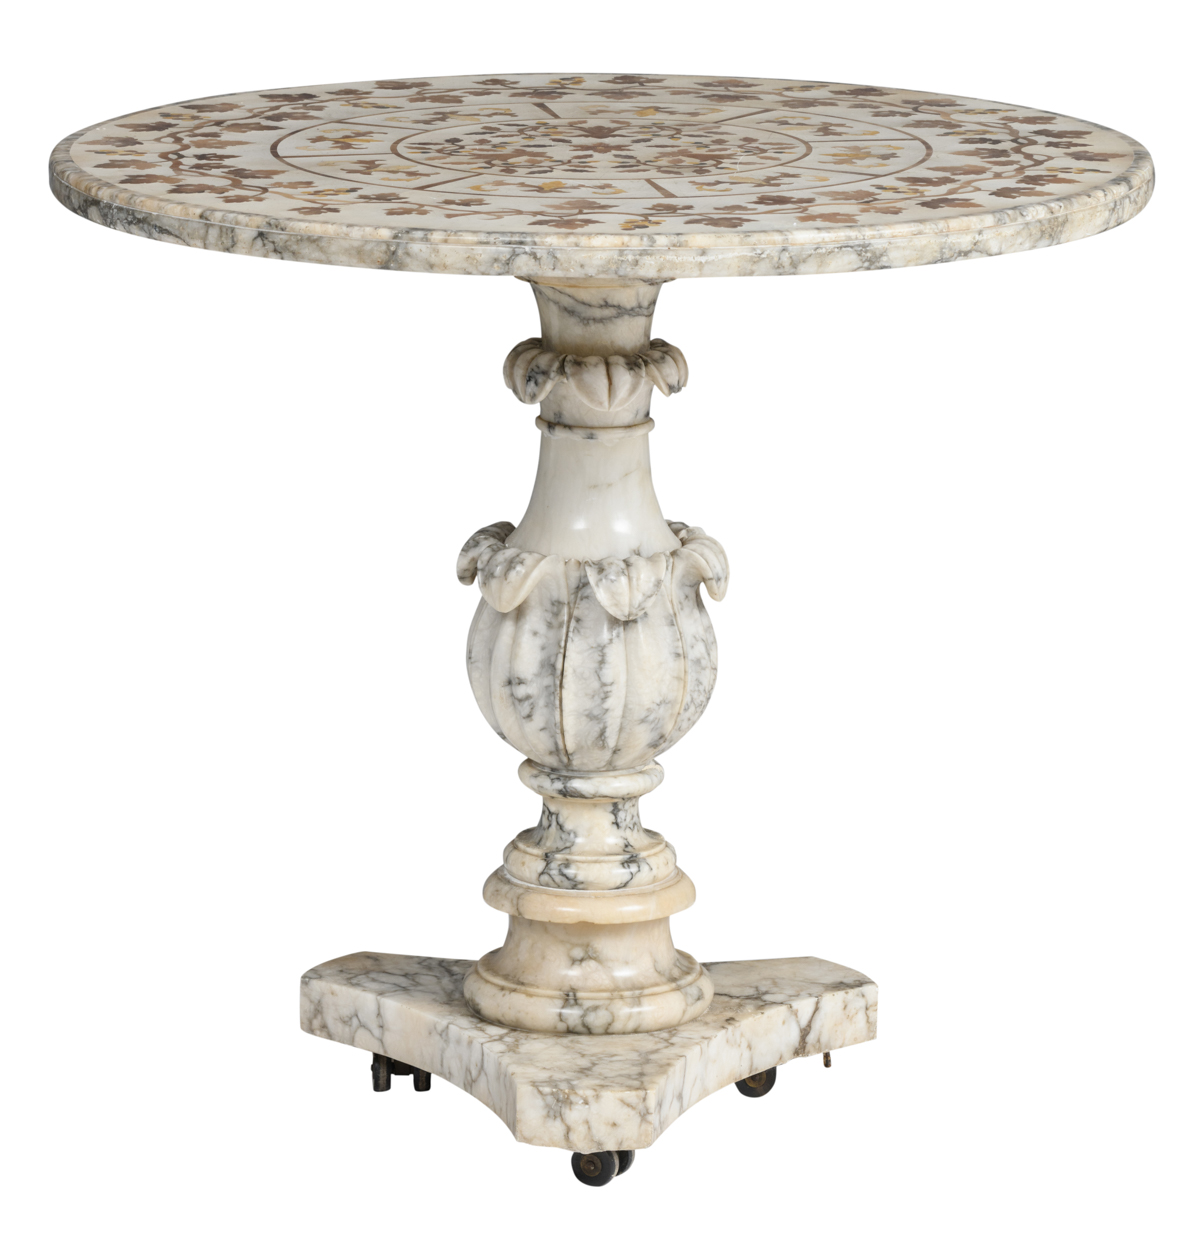 A Brèche violet marble guéridon with a pietra dura Carrara marble top, decorated with vines, H